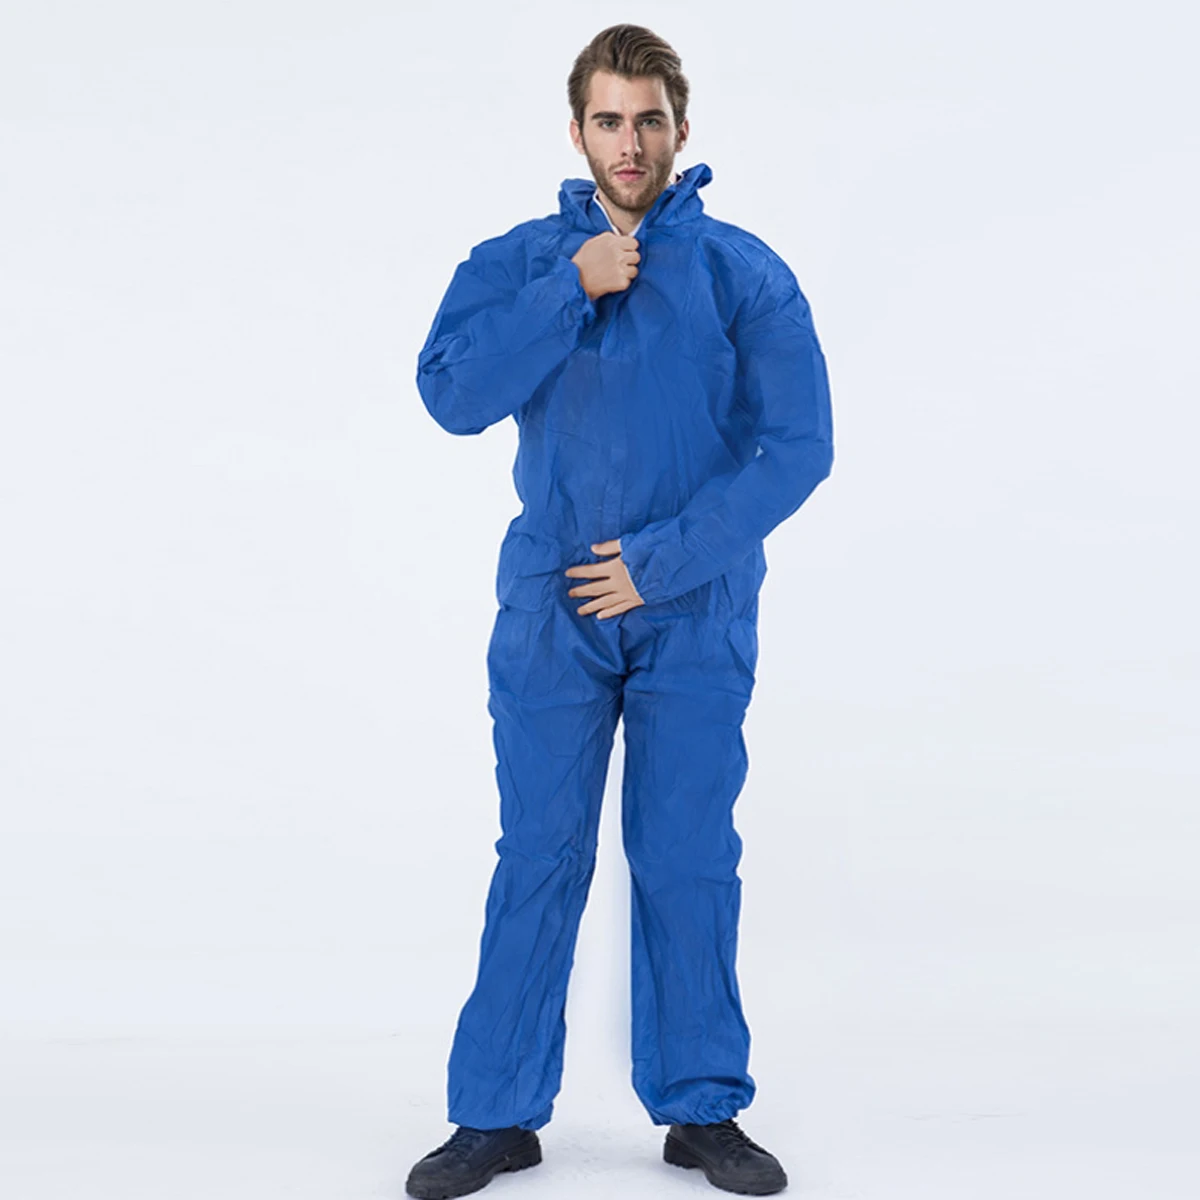 PPE Reusable Coverall Hazmat Suit Protective Suit Disposable Protection Clothing Anti Bacterial Work Medical Isolation Suit